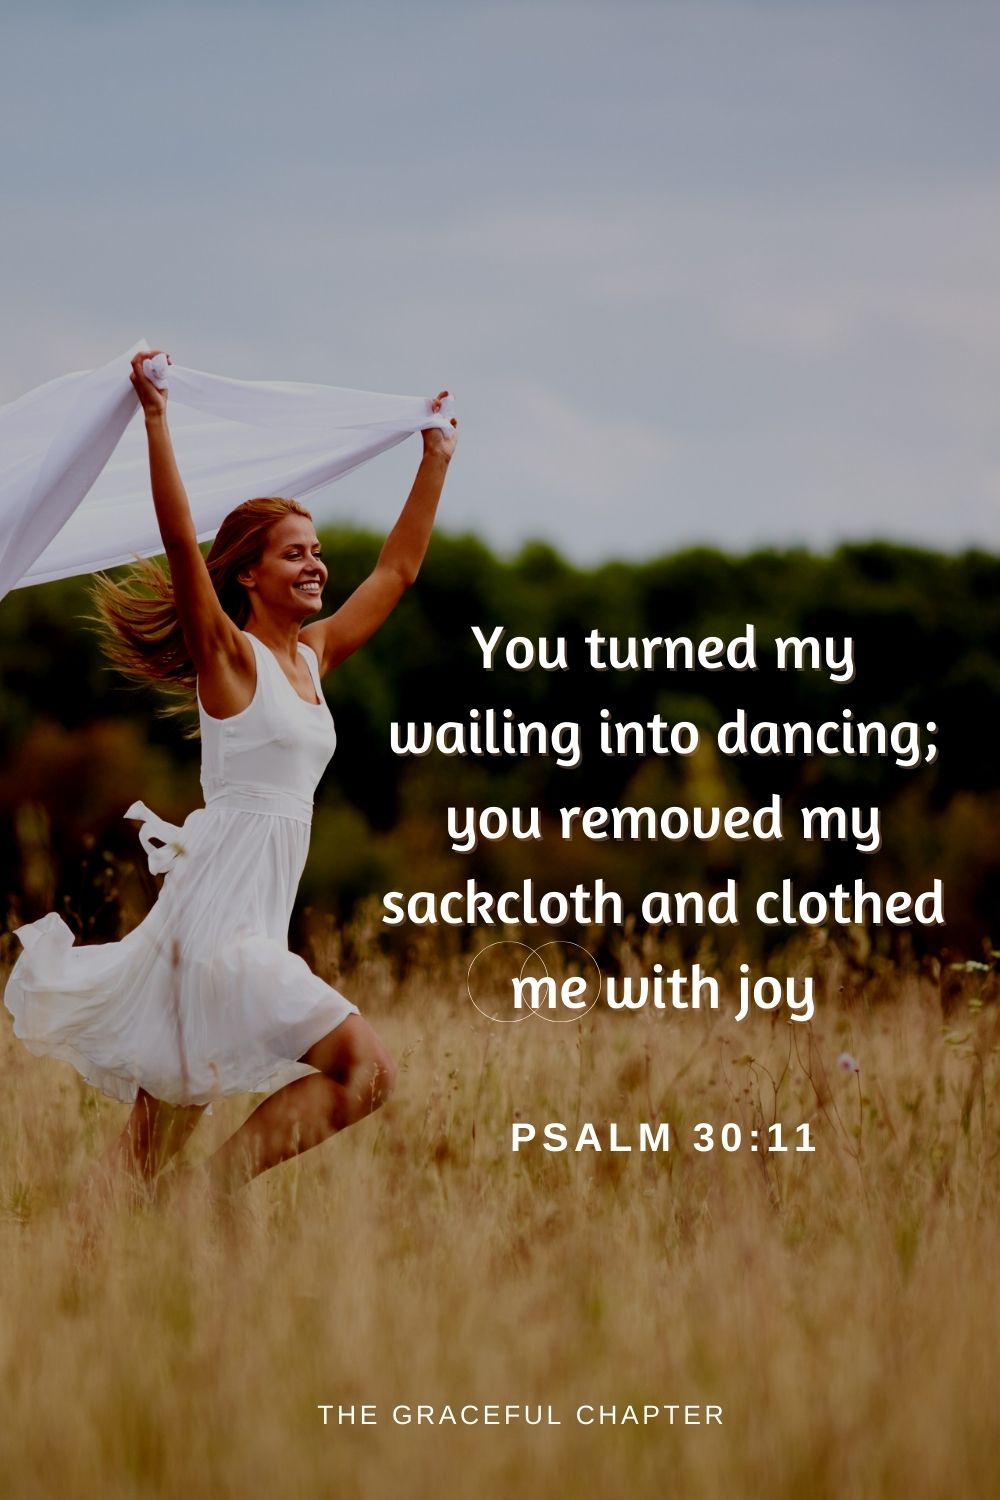 You turned my wailing into dancing; you removed my sackcloth and clothed me with joy